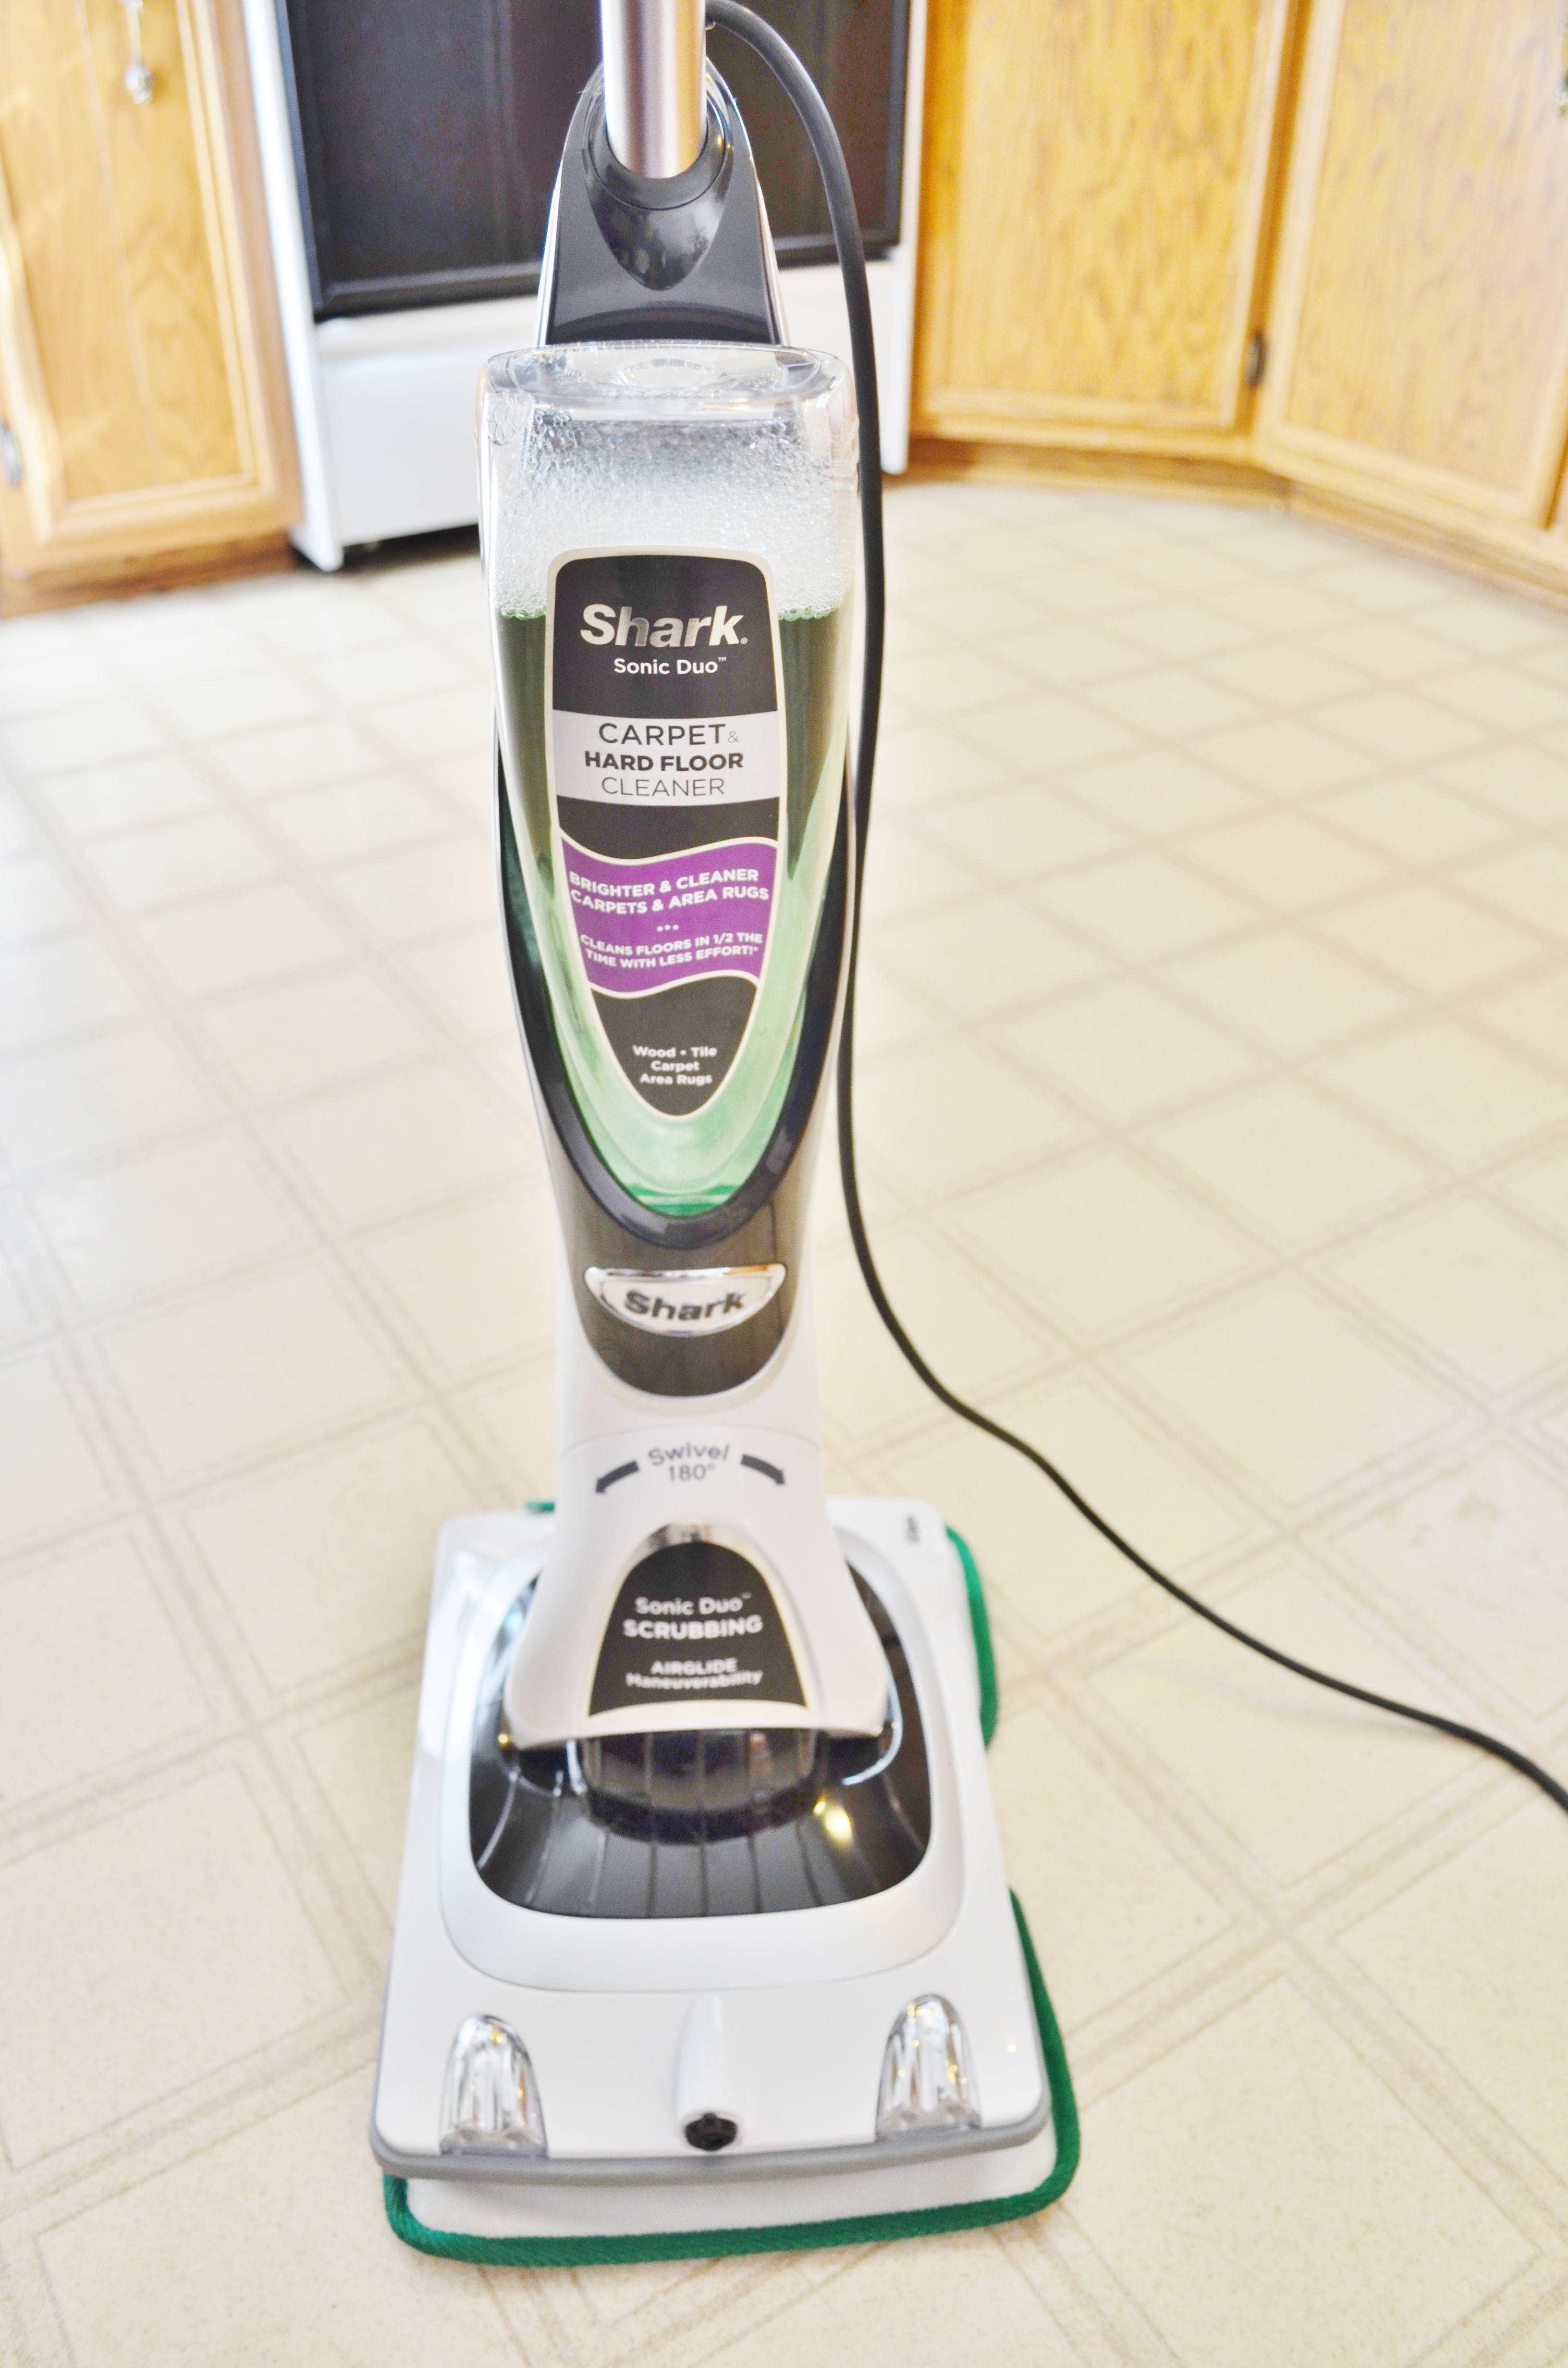 Shark Duo carpet, wood hard floor cleaning system